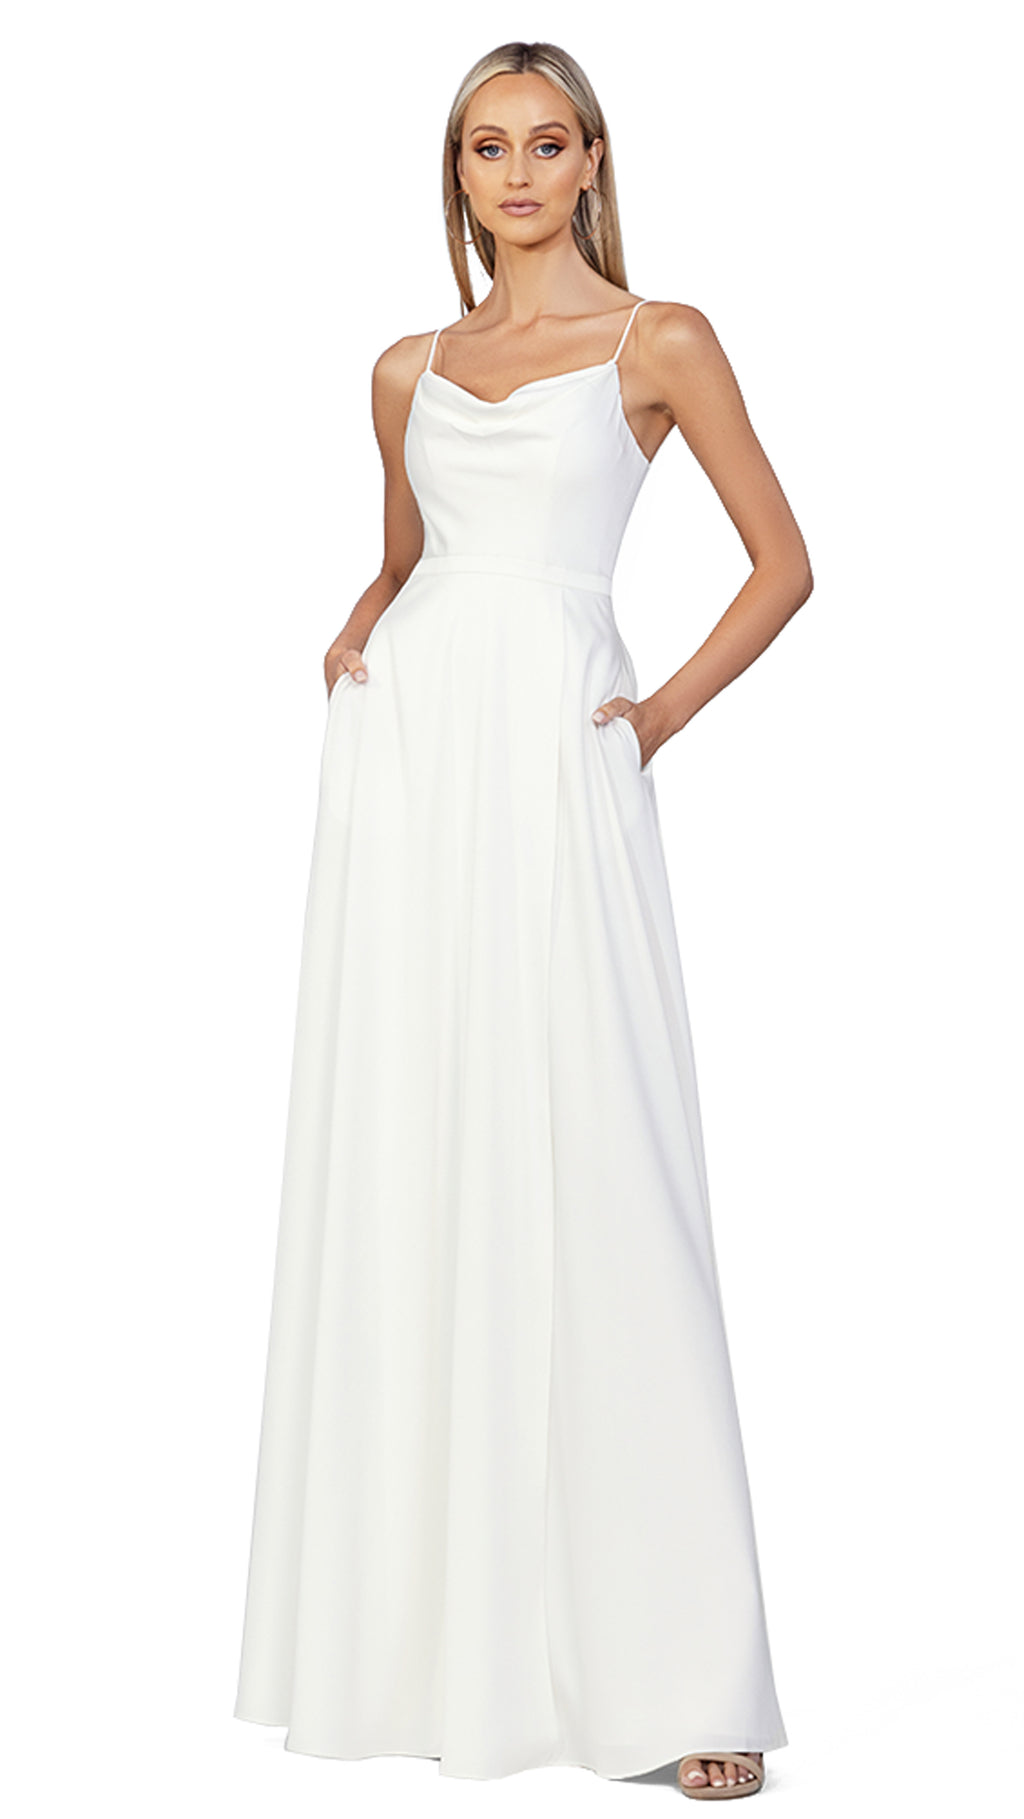 Bariano Diamond Cowl Wrap Gown in White 